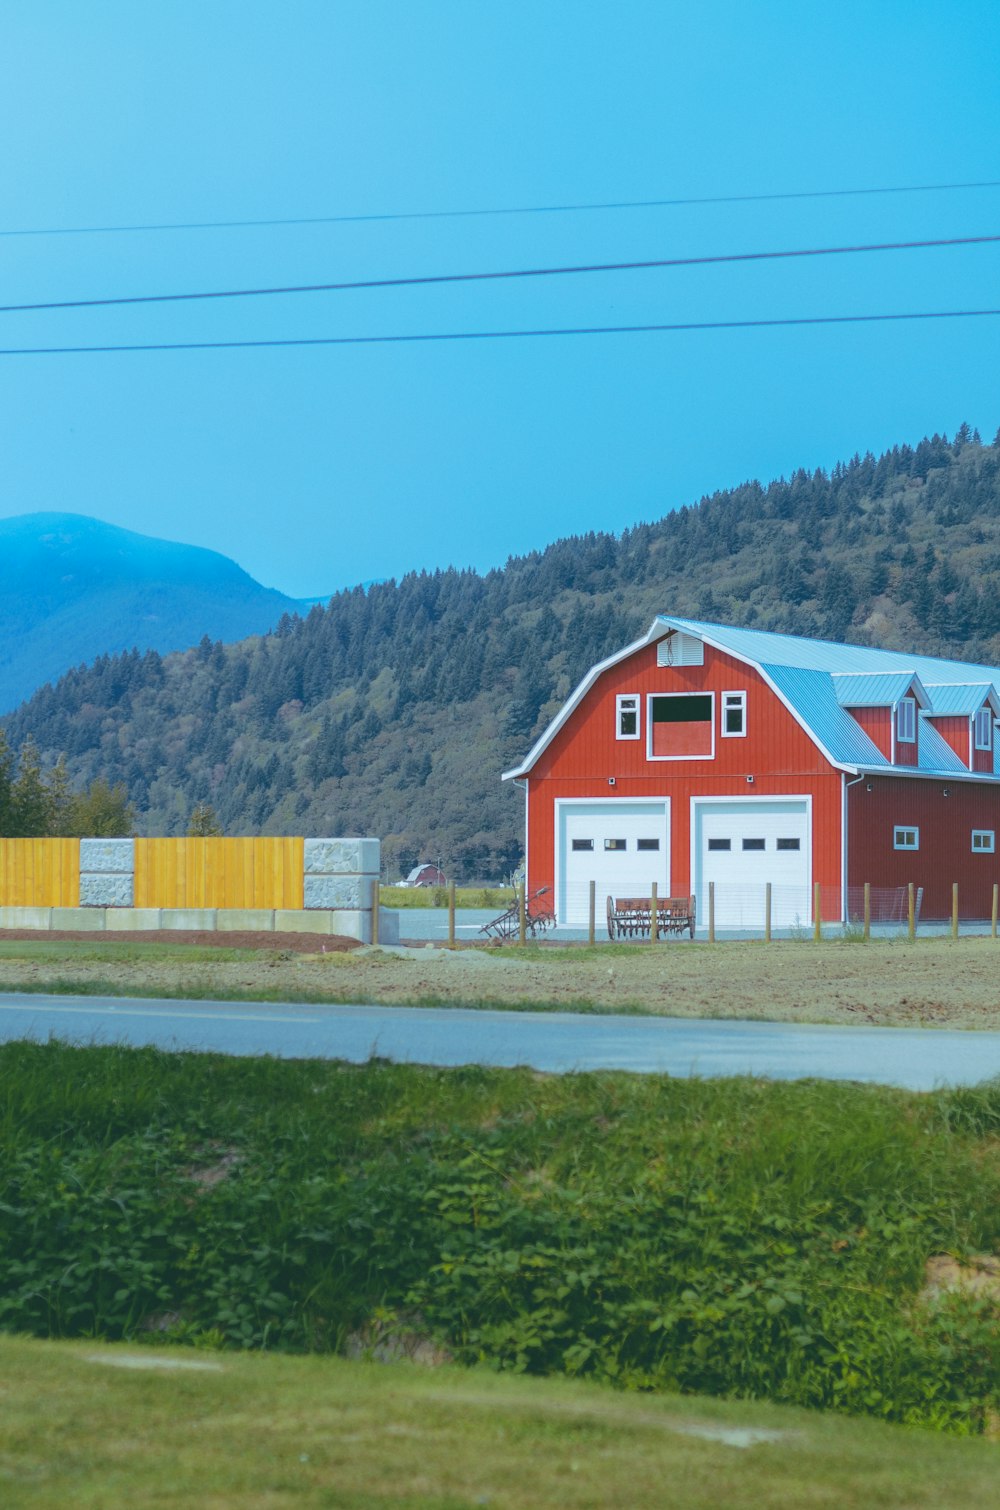 a red barn with a blue roof next to a road